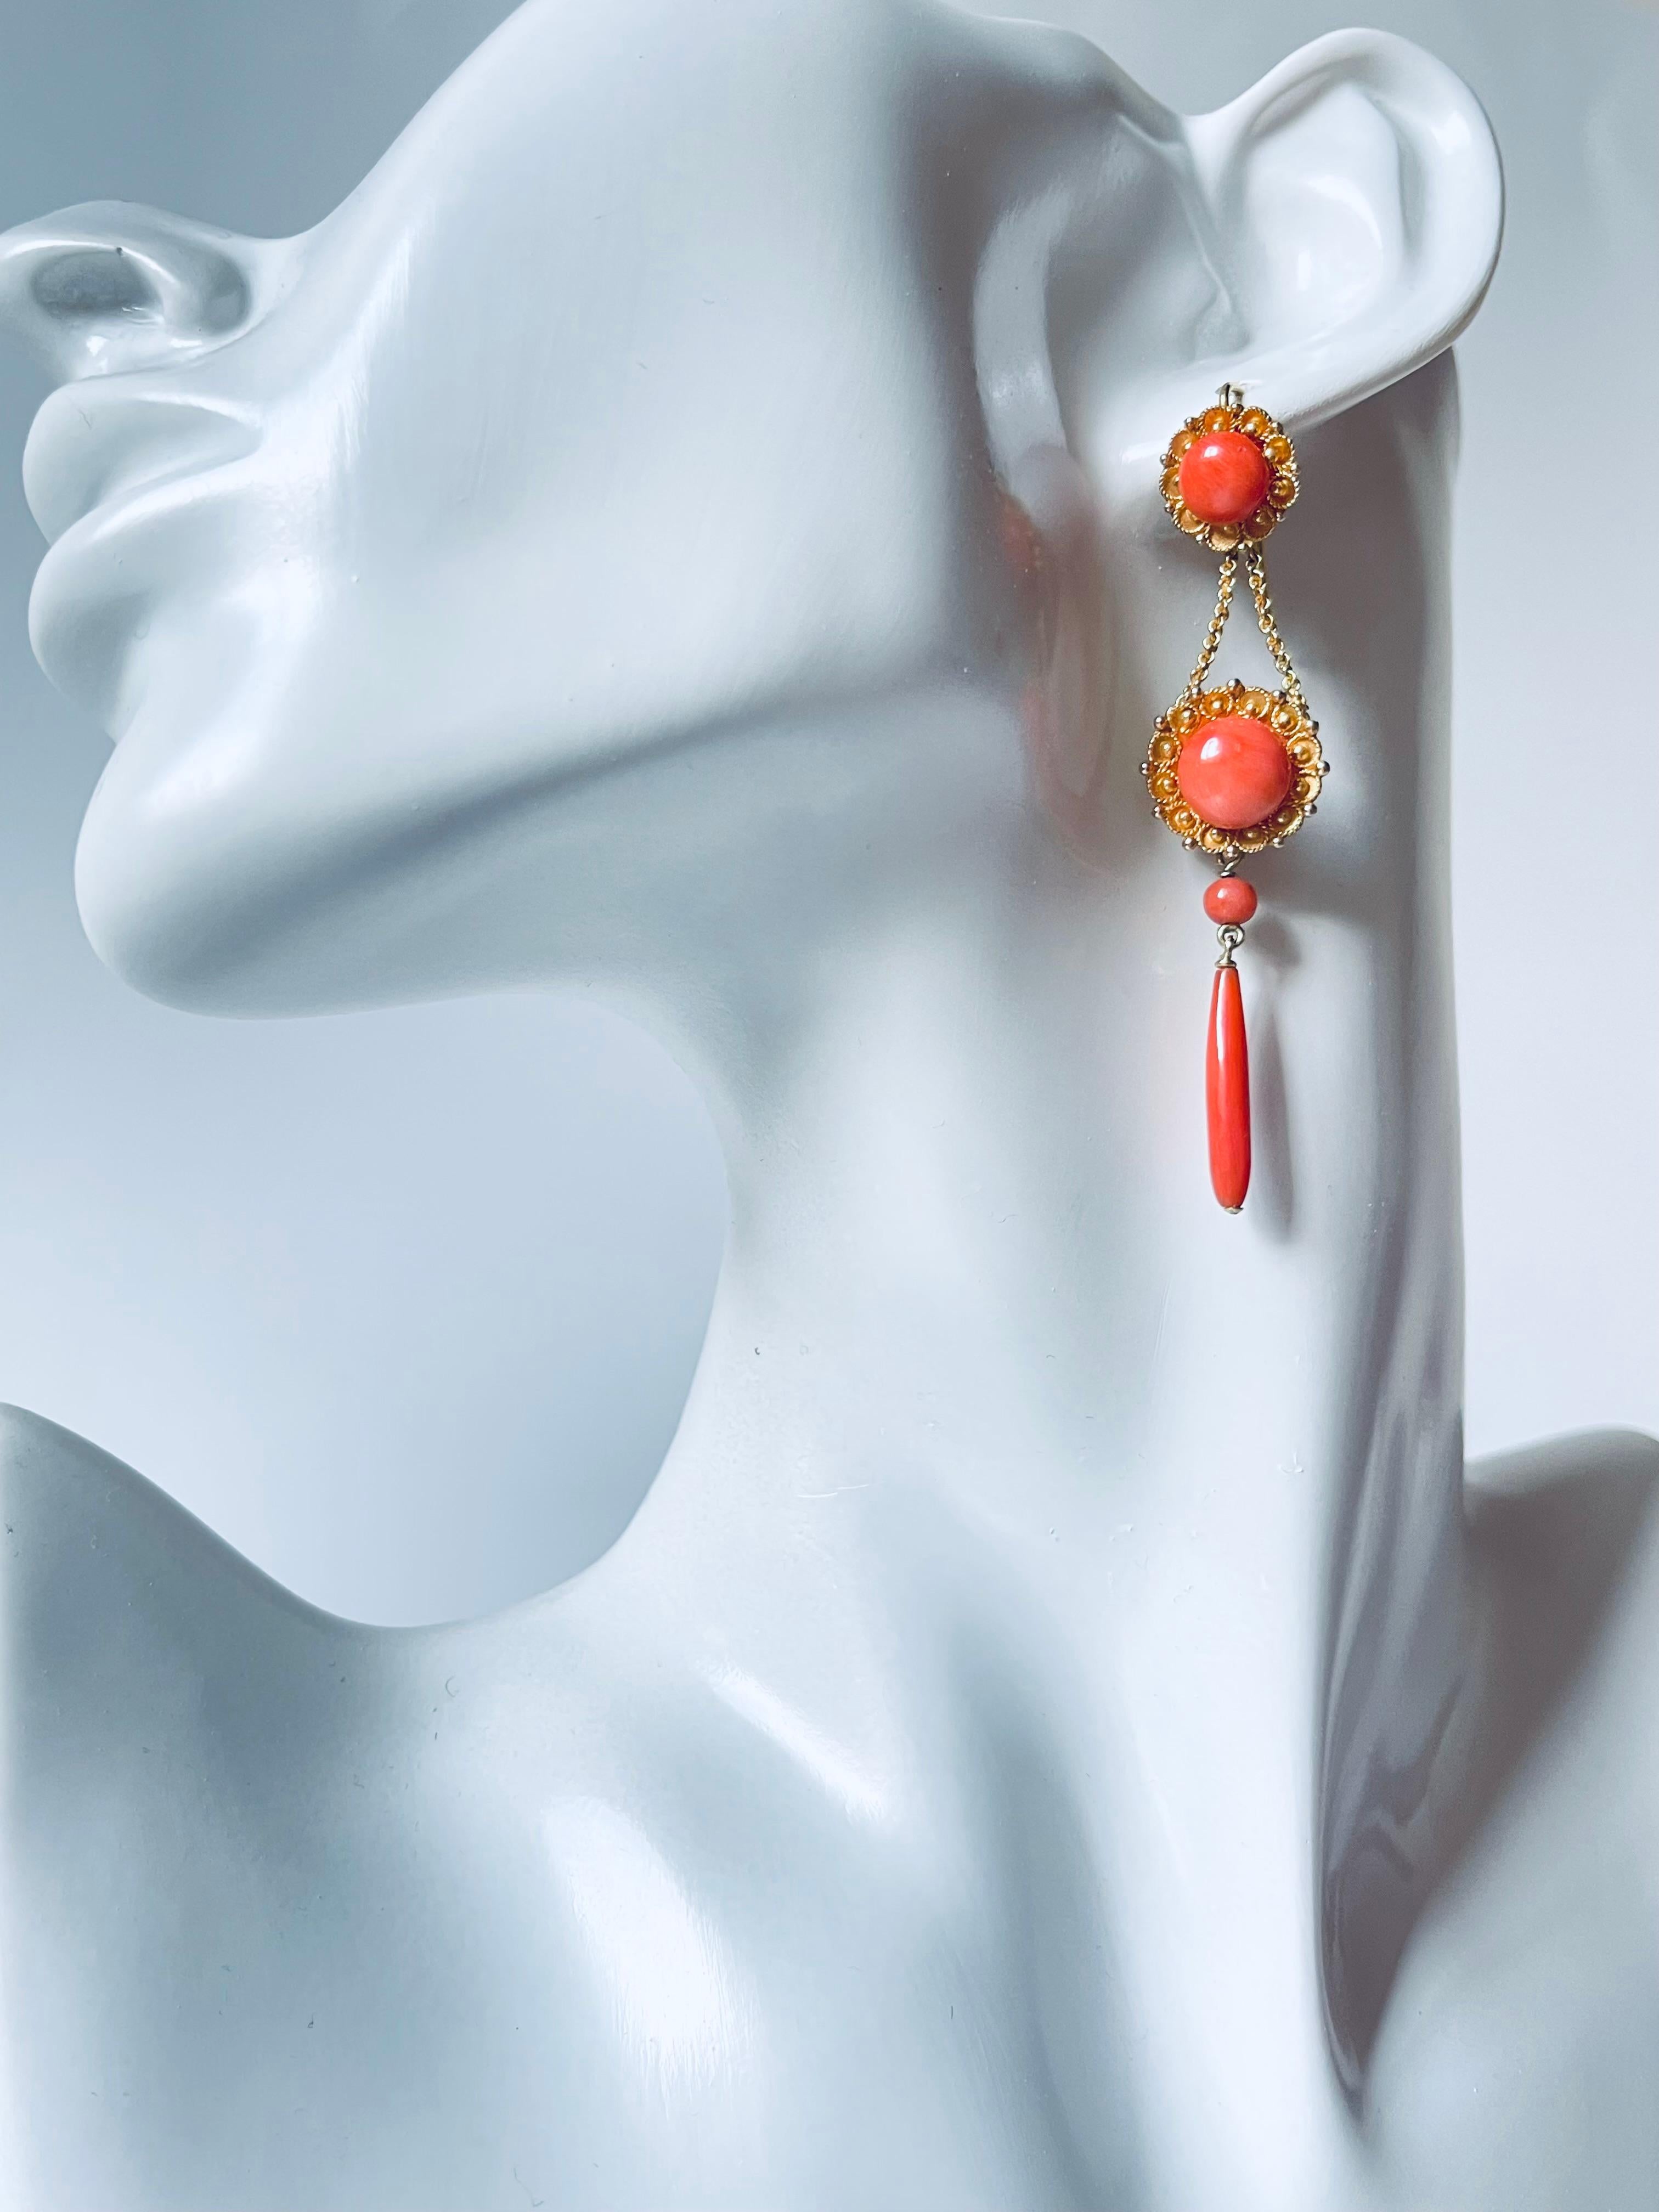 A pair of authentic, very fine Victorian period coral and 18K yellow gold earrings, possibly Italian, in the Etruscan Revival style, immensely fashionable at the time and inspired by jewels unearthed at archaeological digs in ancient Etruria.